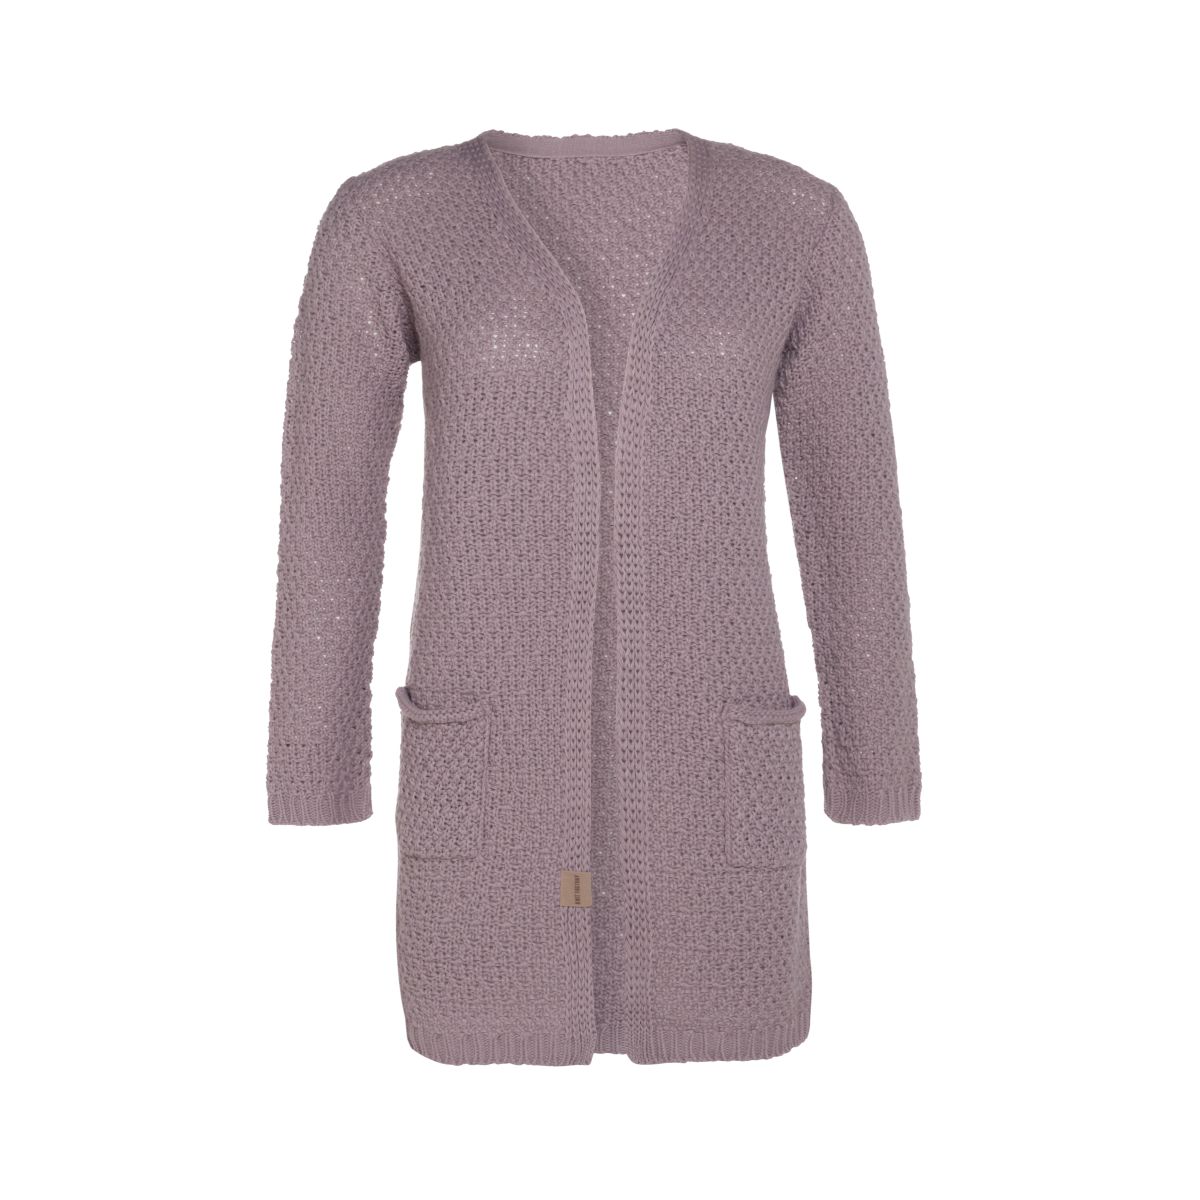 luna knitted cardigan mauve 4042 with side pockets